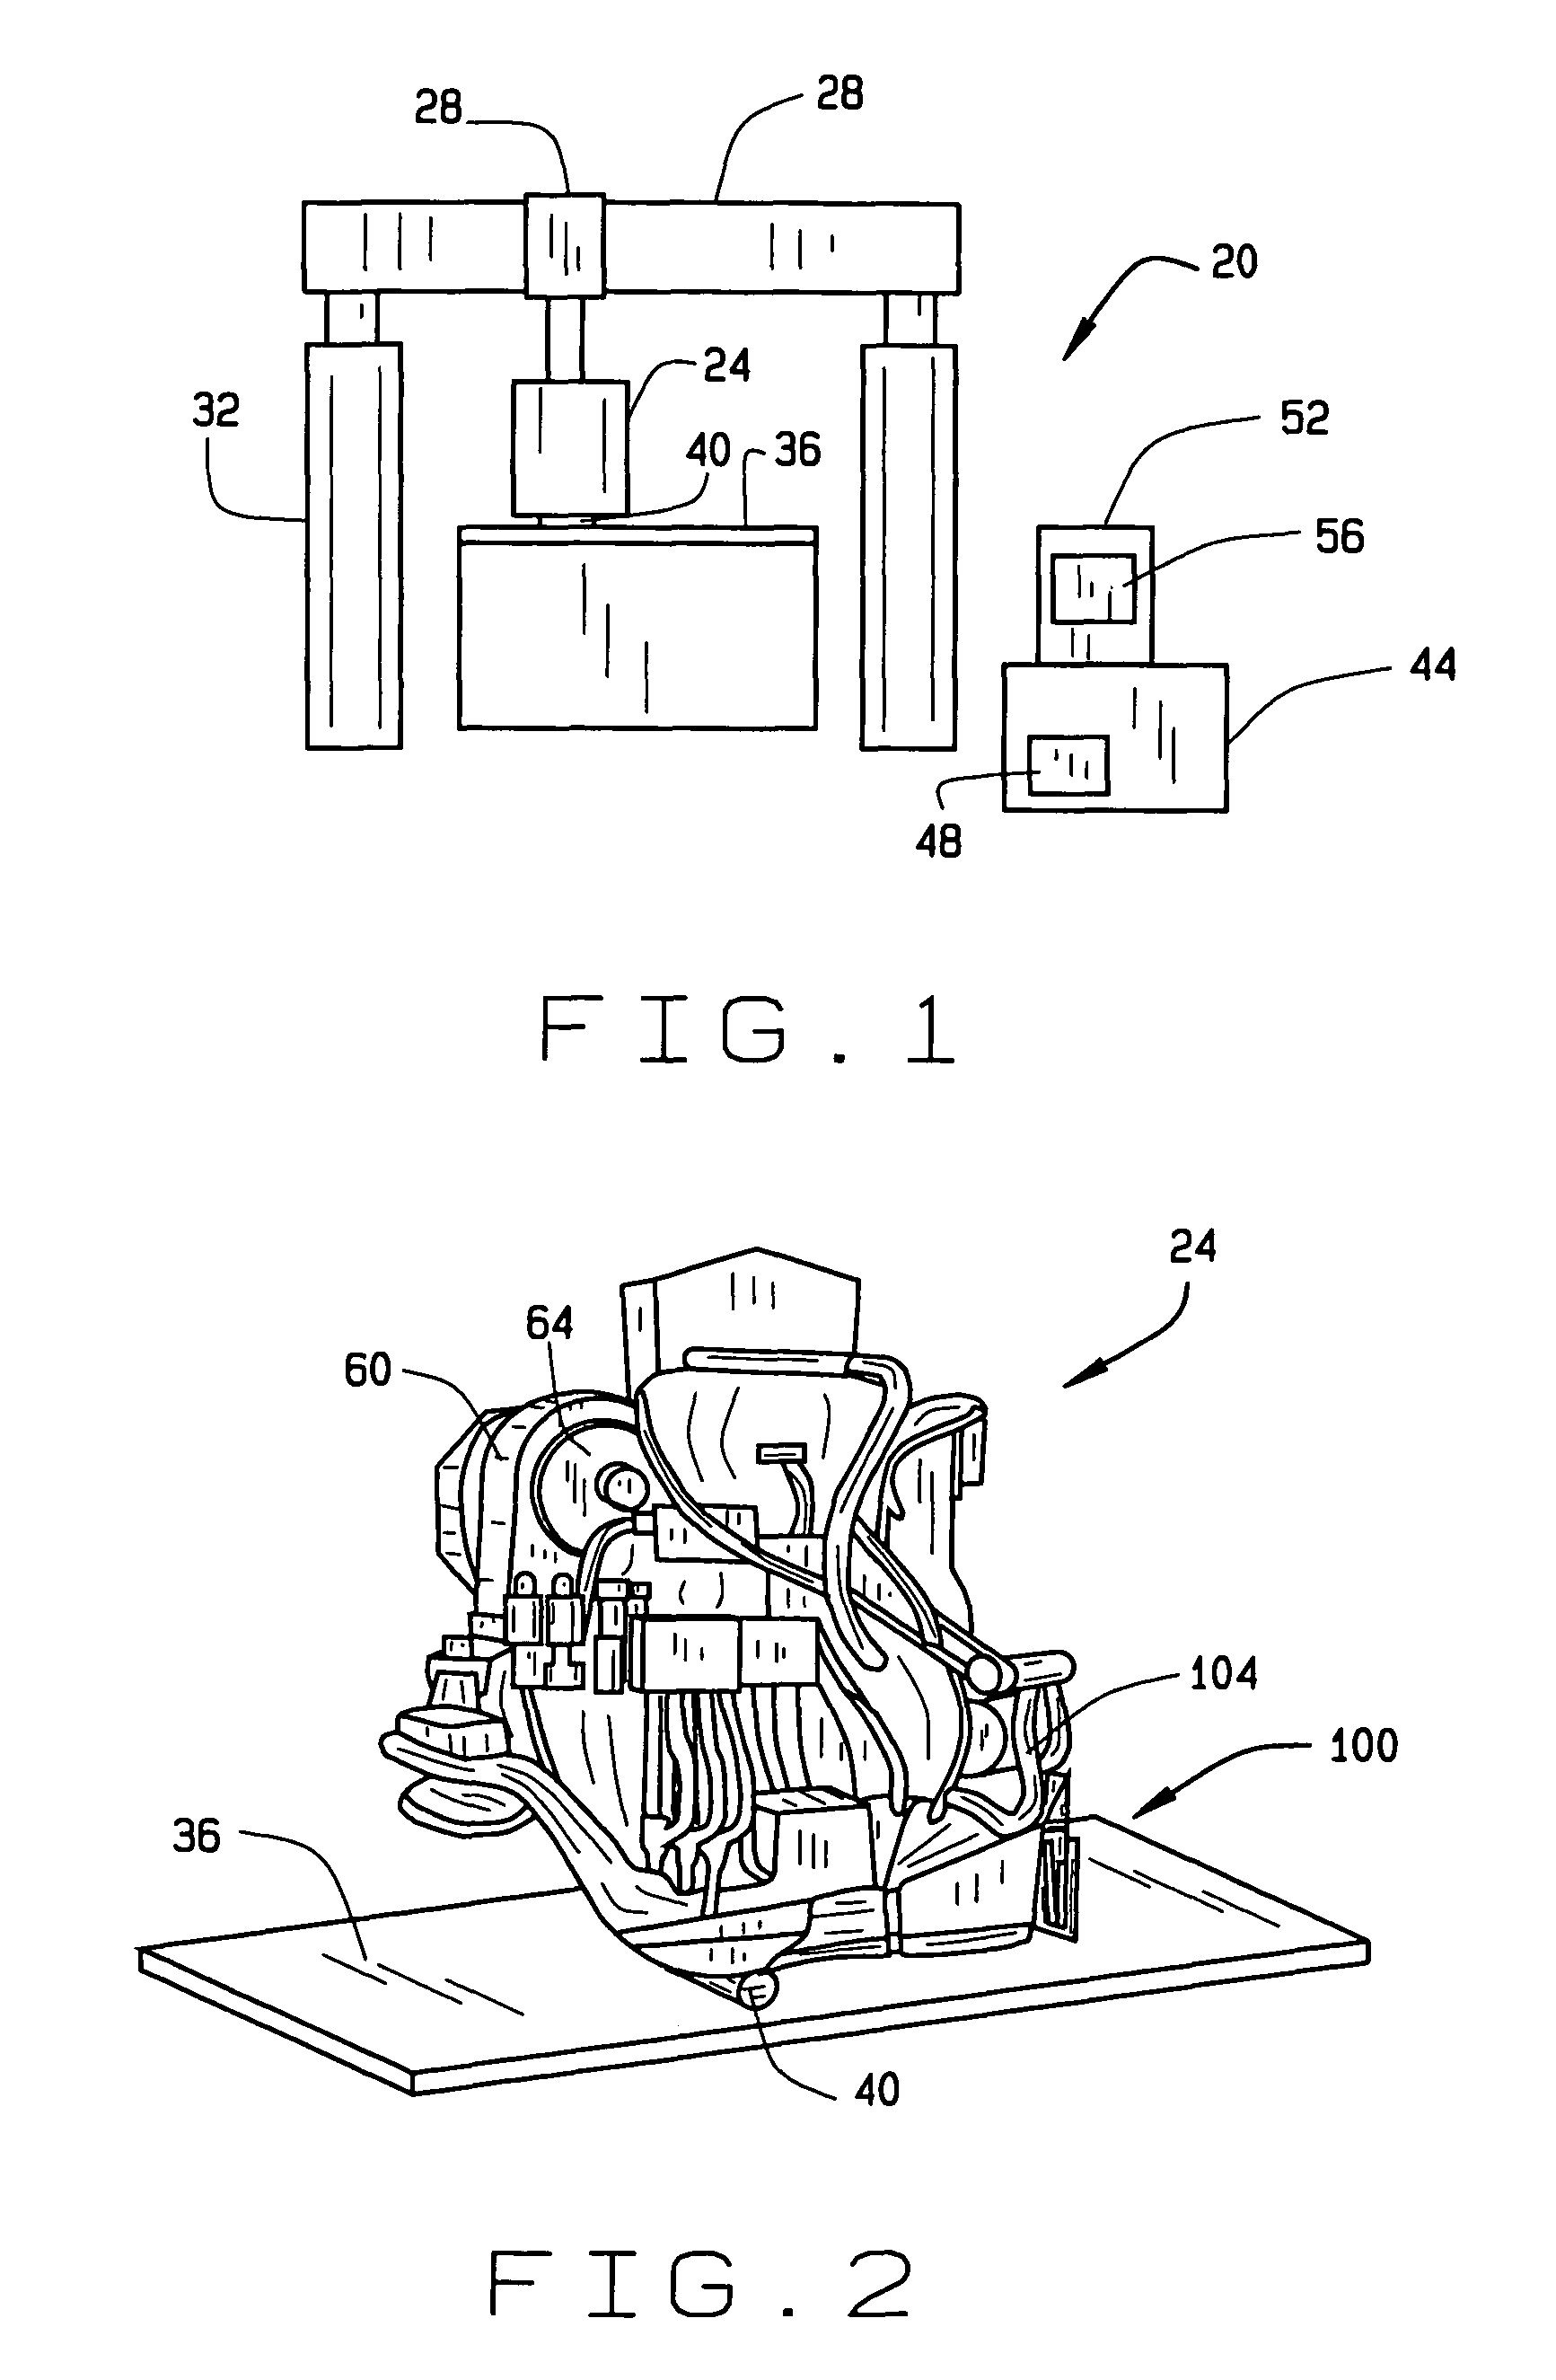 Apparatus and methods for inspecting tape lamination